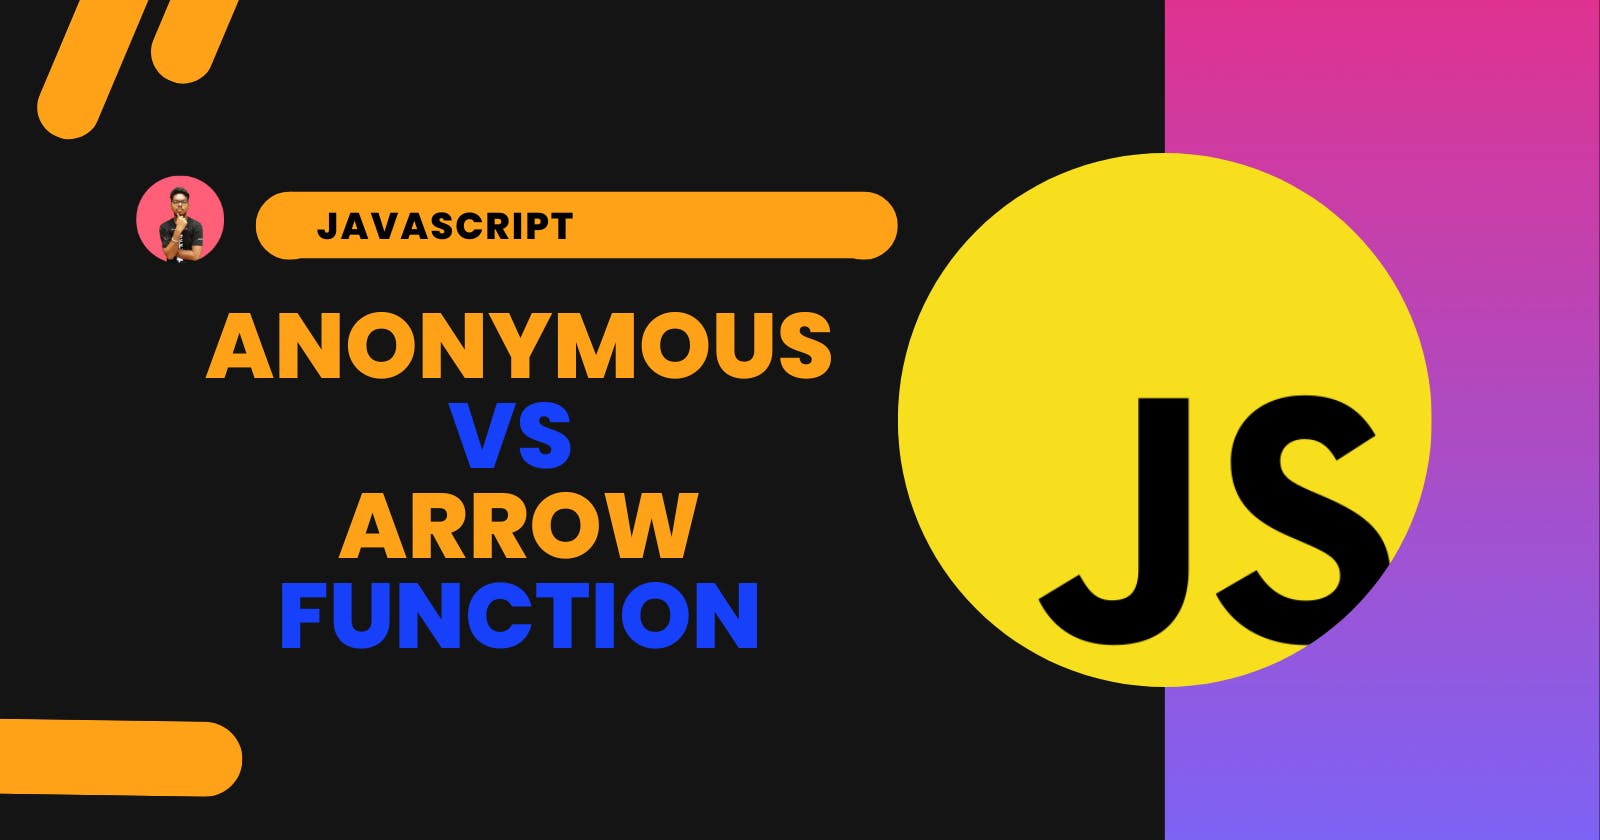 What is JavaScript's Anonymous and Arrow function?